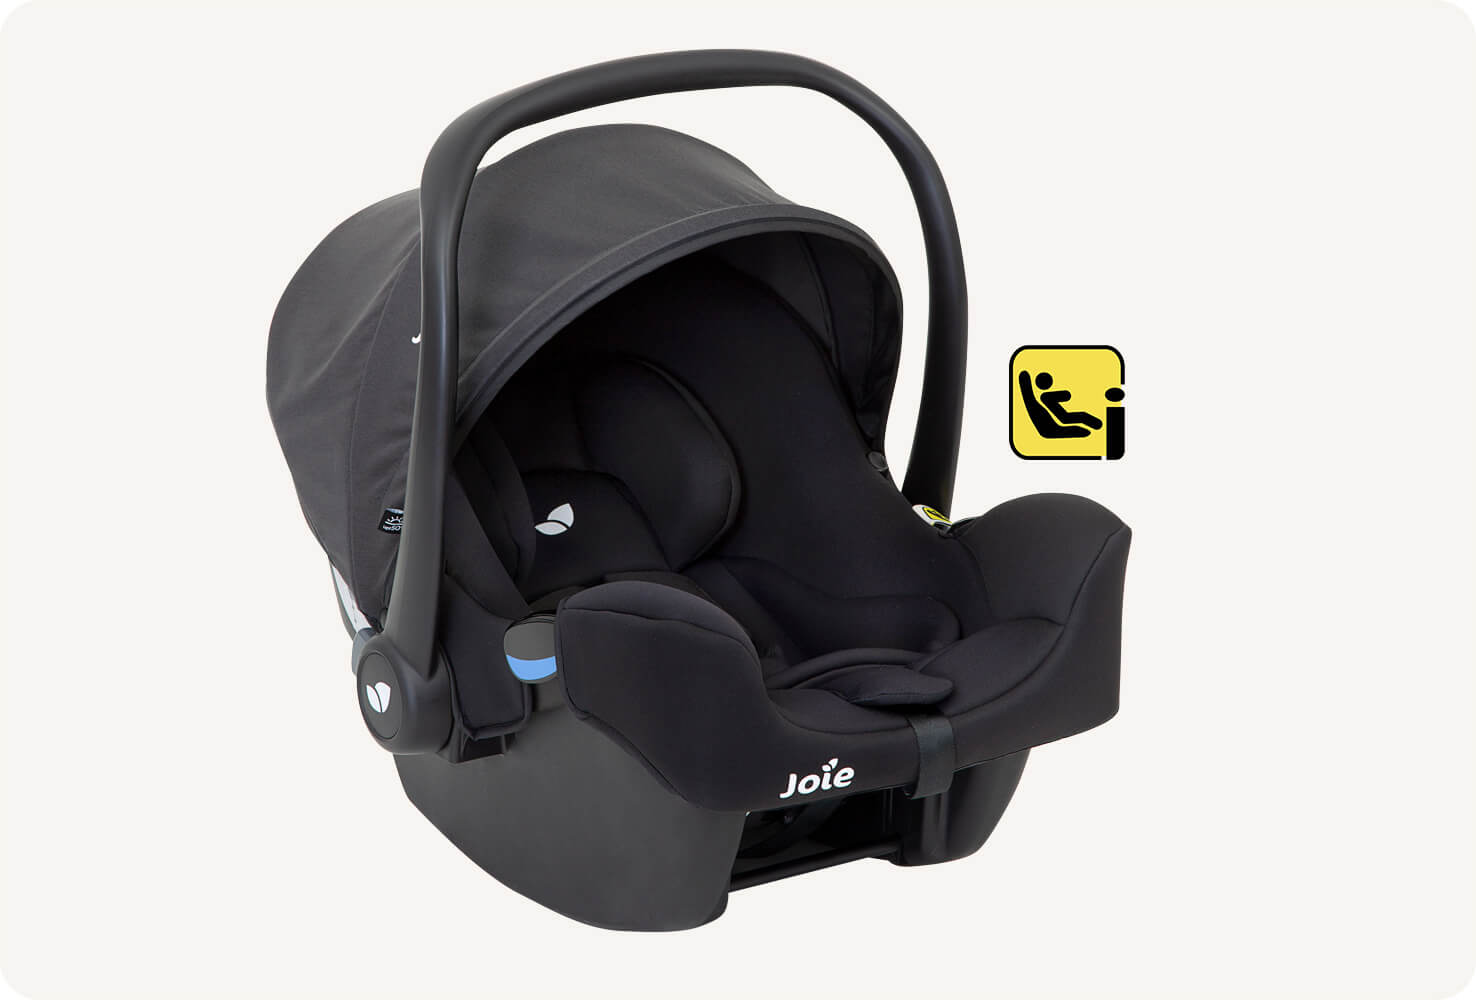  Joie I-Snug 2 infant car seat facing to the right at an angle with the I-Size logo beside the seat.